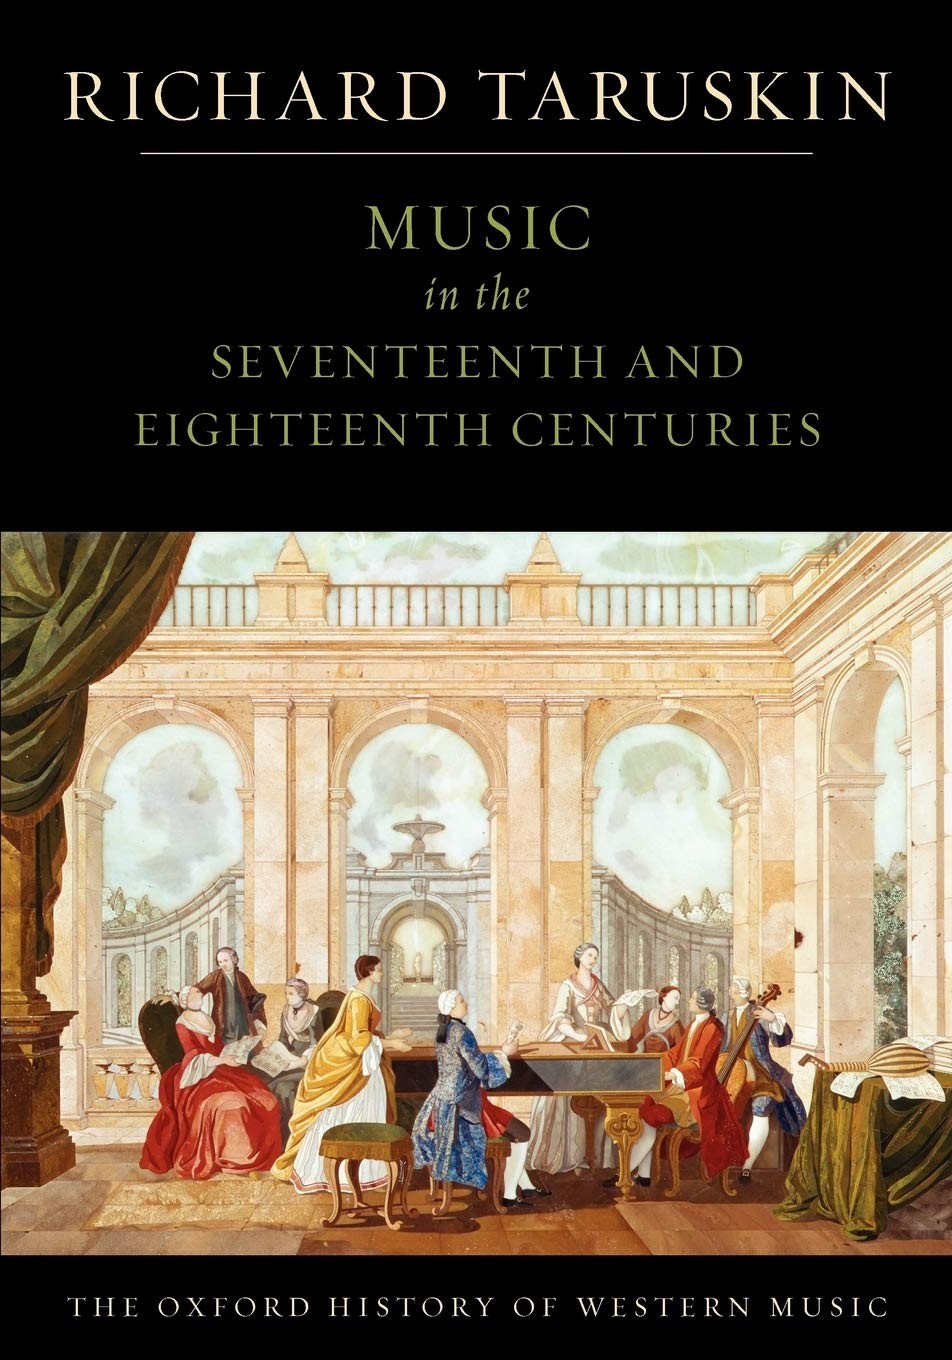 The Oxford History of Western Music, Volume 2 Music in the 17th and 18th Centuries